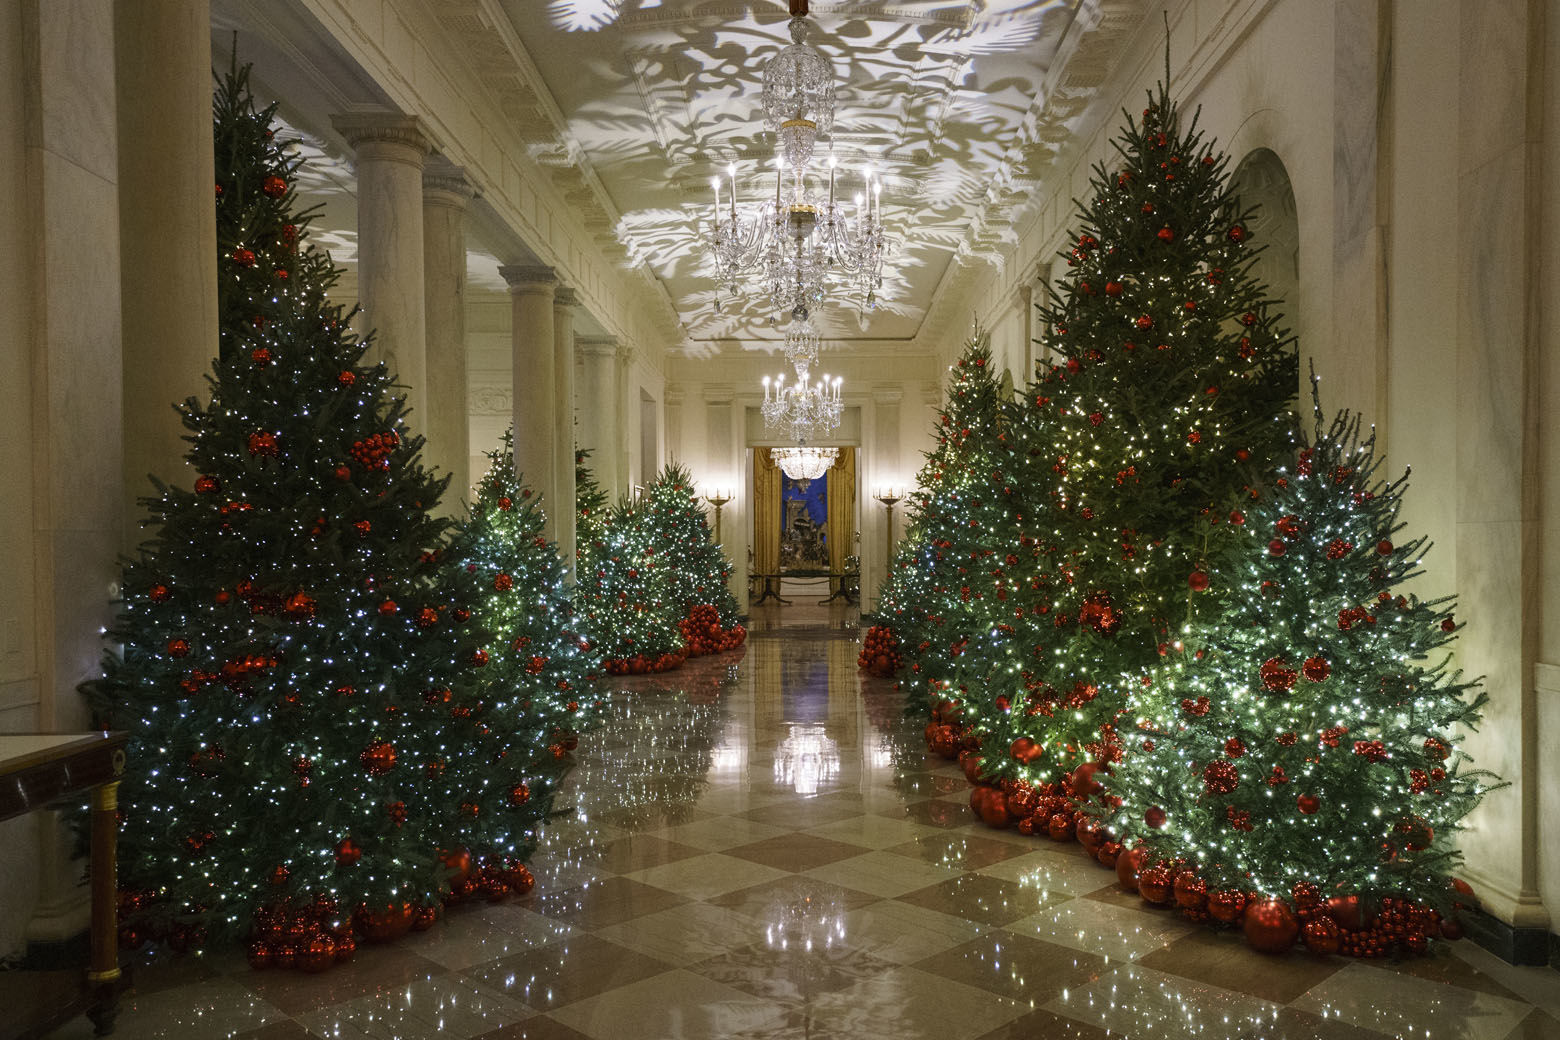 The Cross Hall is seen during the 2018 Christmas Press Preview at the White House in Washington, Monday, Nov. 26, 2018. Christmas has arrived at the White House. First lady Melania Trump unveiled the 2018 White House holiday decor on Monday. She designed the decor, which features a theme of "American Treasures." (AP Photo/Carolyn Kaster)